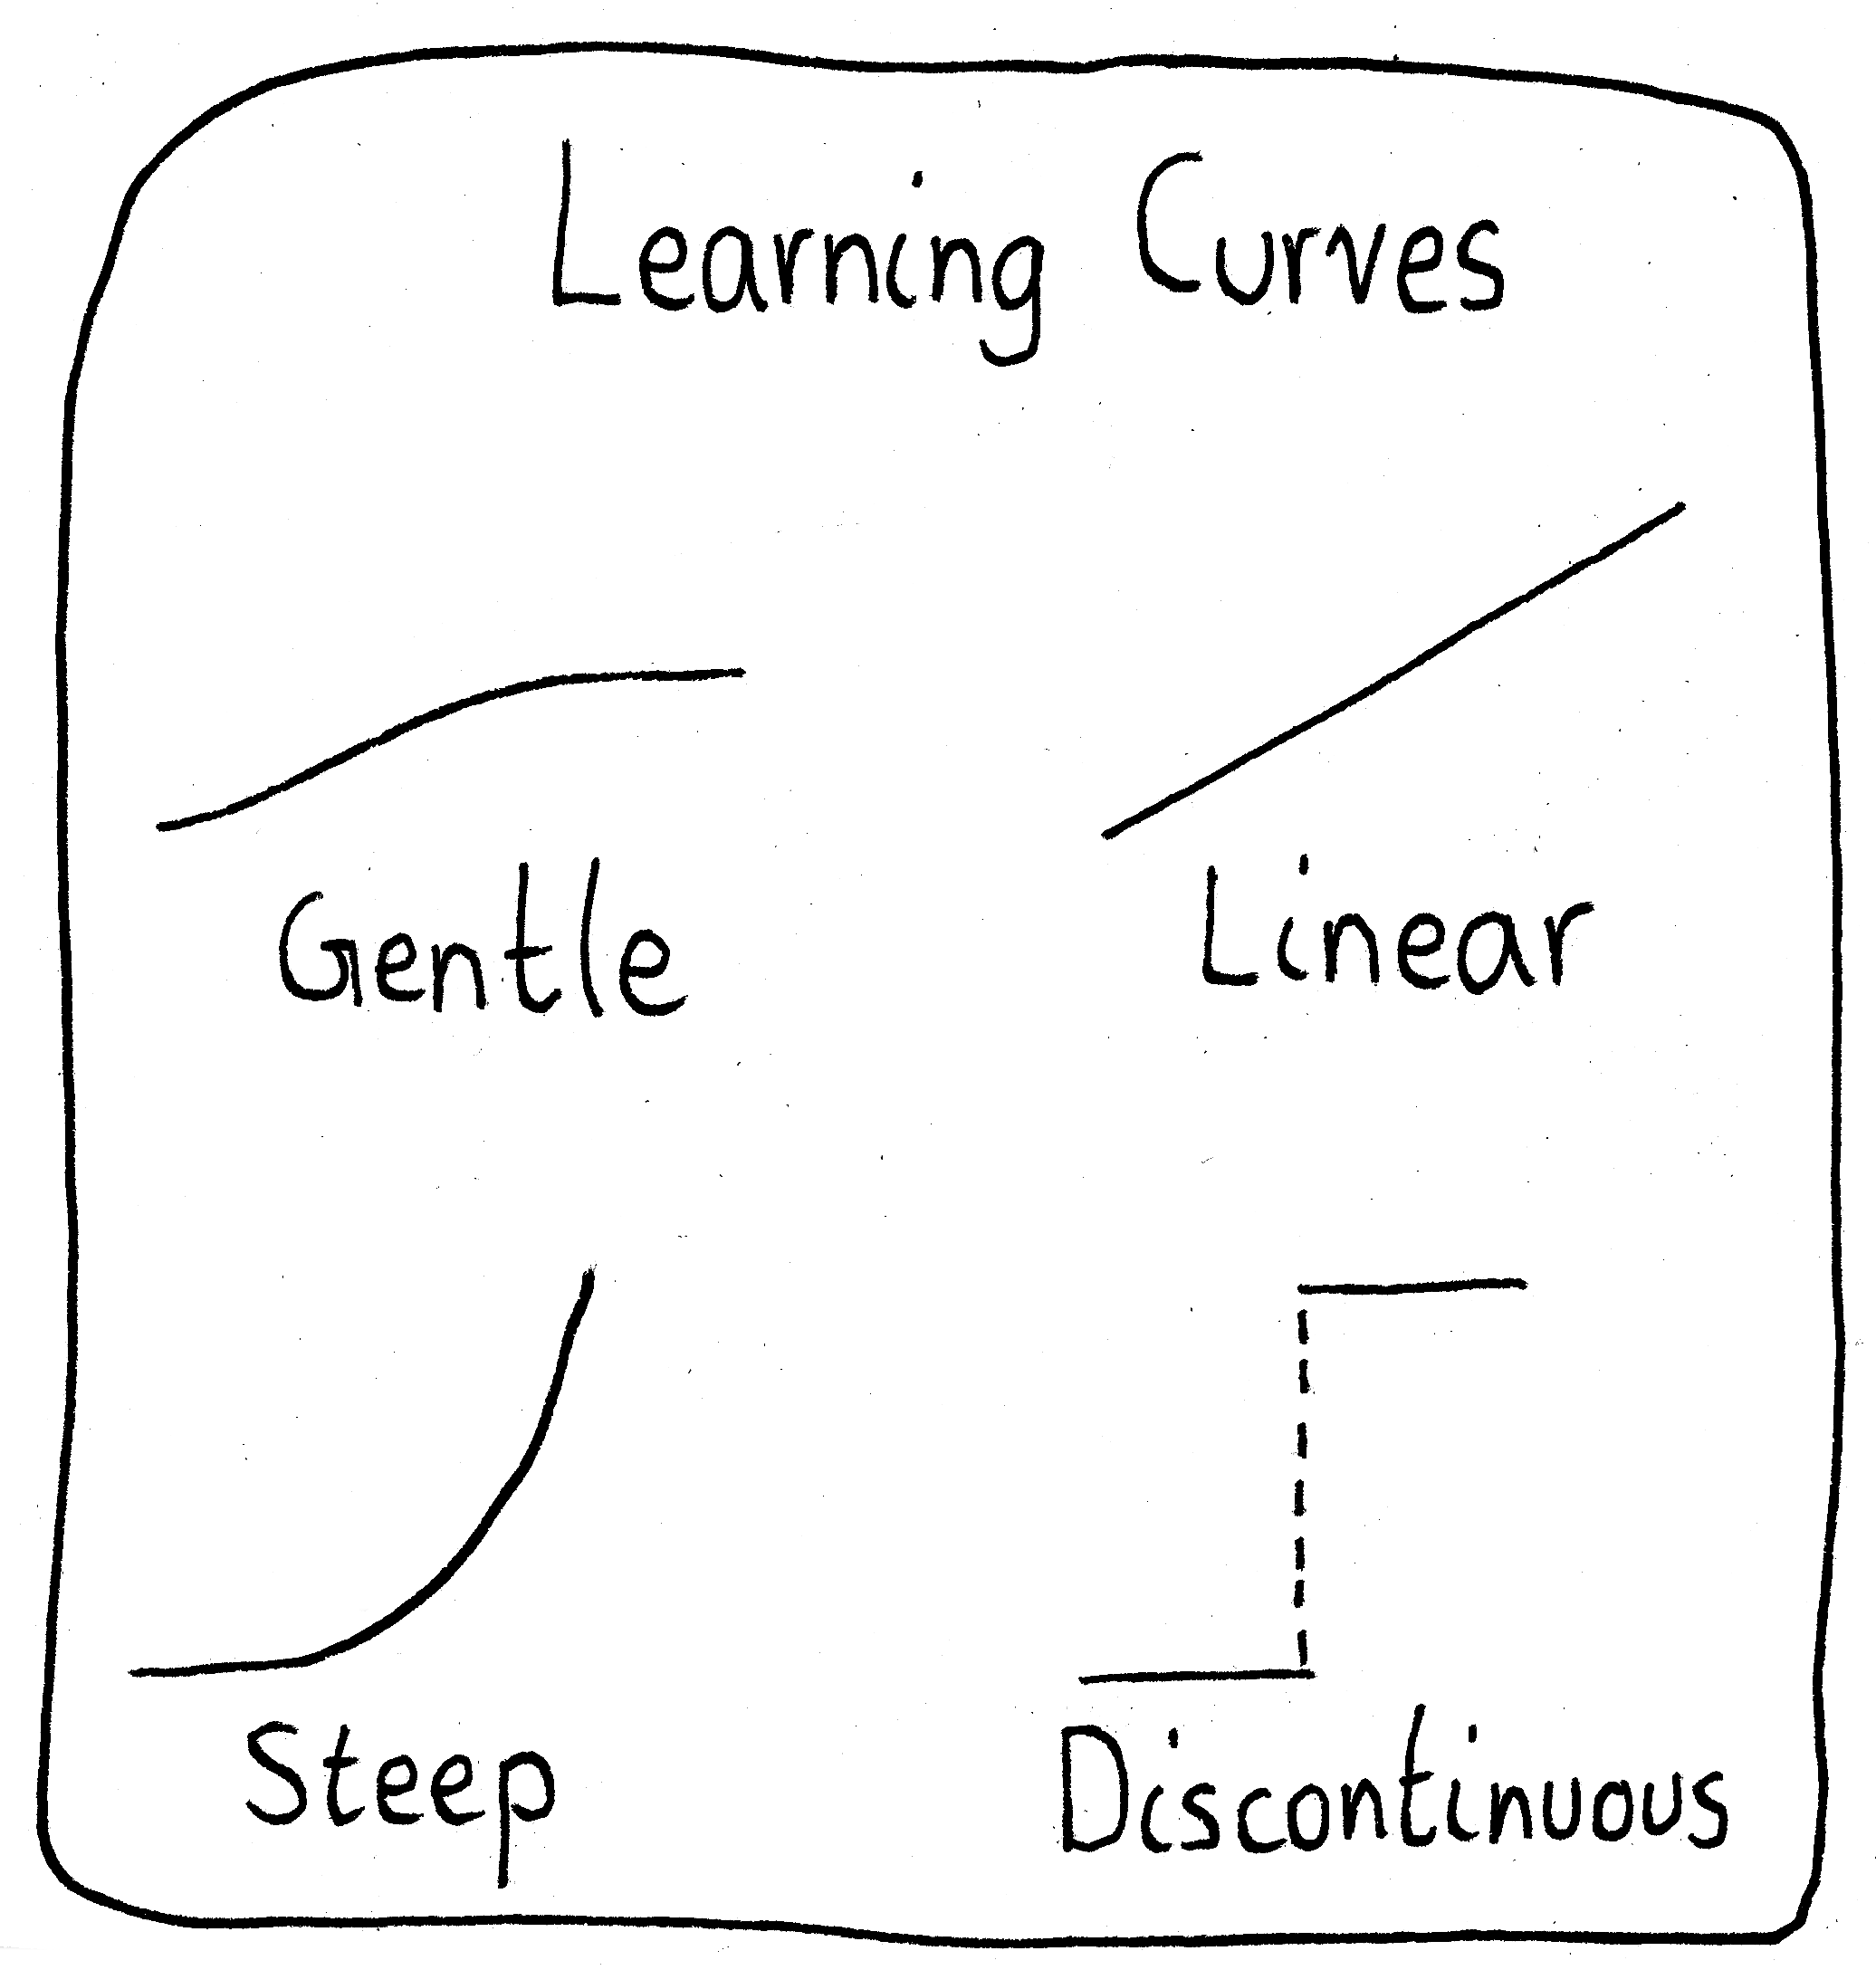 Top-left: Gentle, with a curve increasing slowly. Top-right: Linear, with a curve increasing linearly. Bottom-left: Steep, with a curve rapidly increasing. Bottom-right: Discontinuous, with a curve as a series of steps.